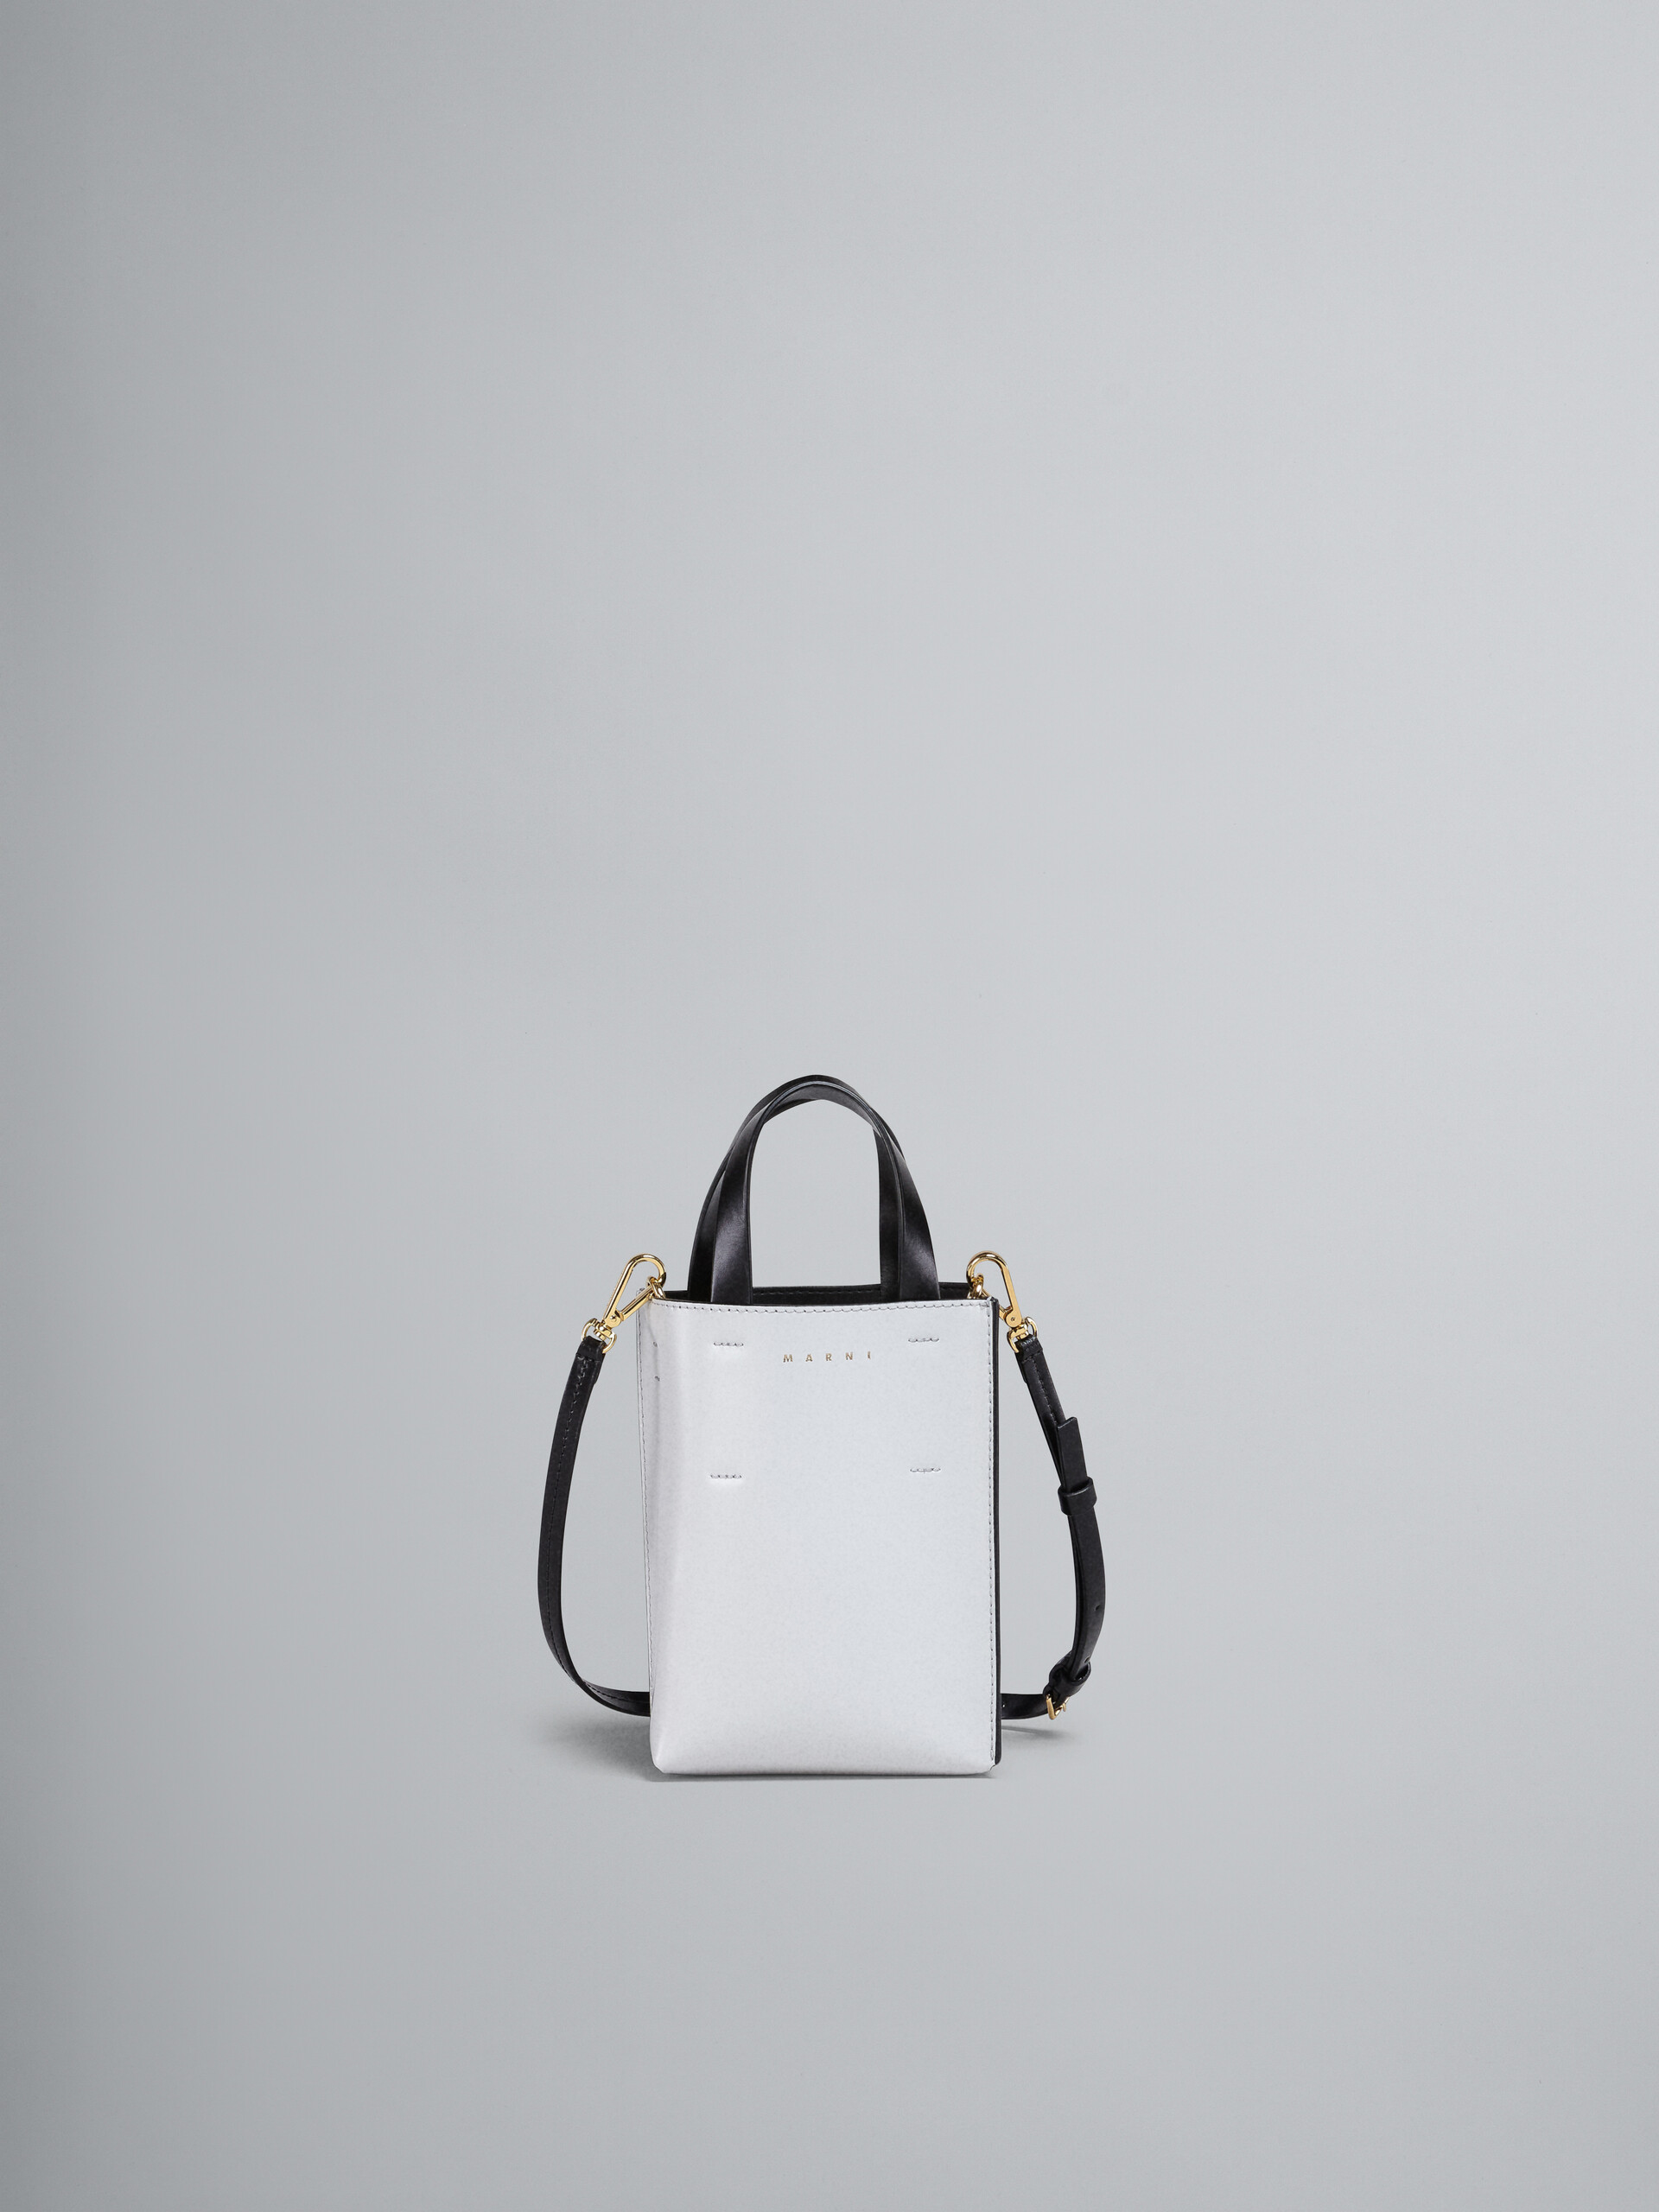 MUSEO nano bag in black shiny leather - Shopping Bags - Image 1